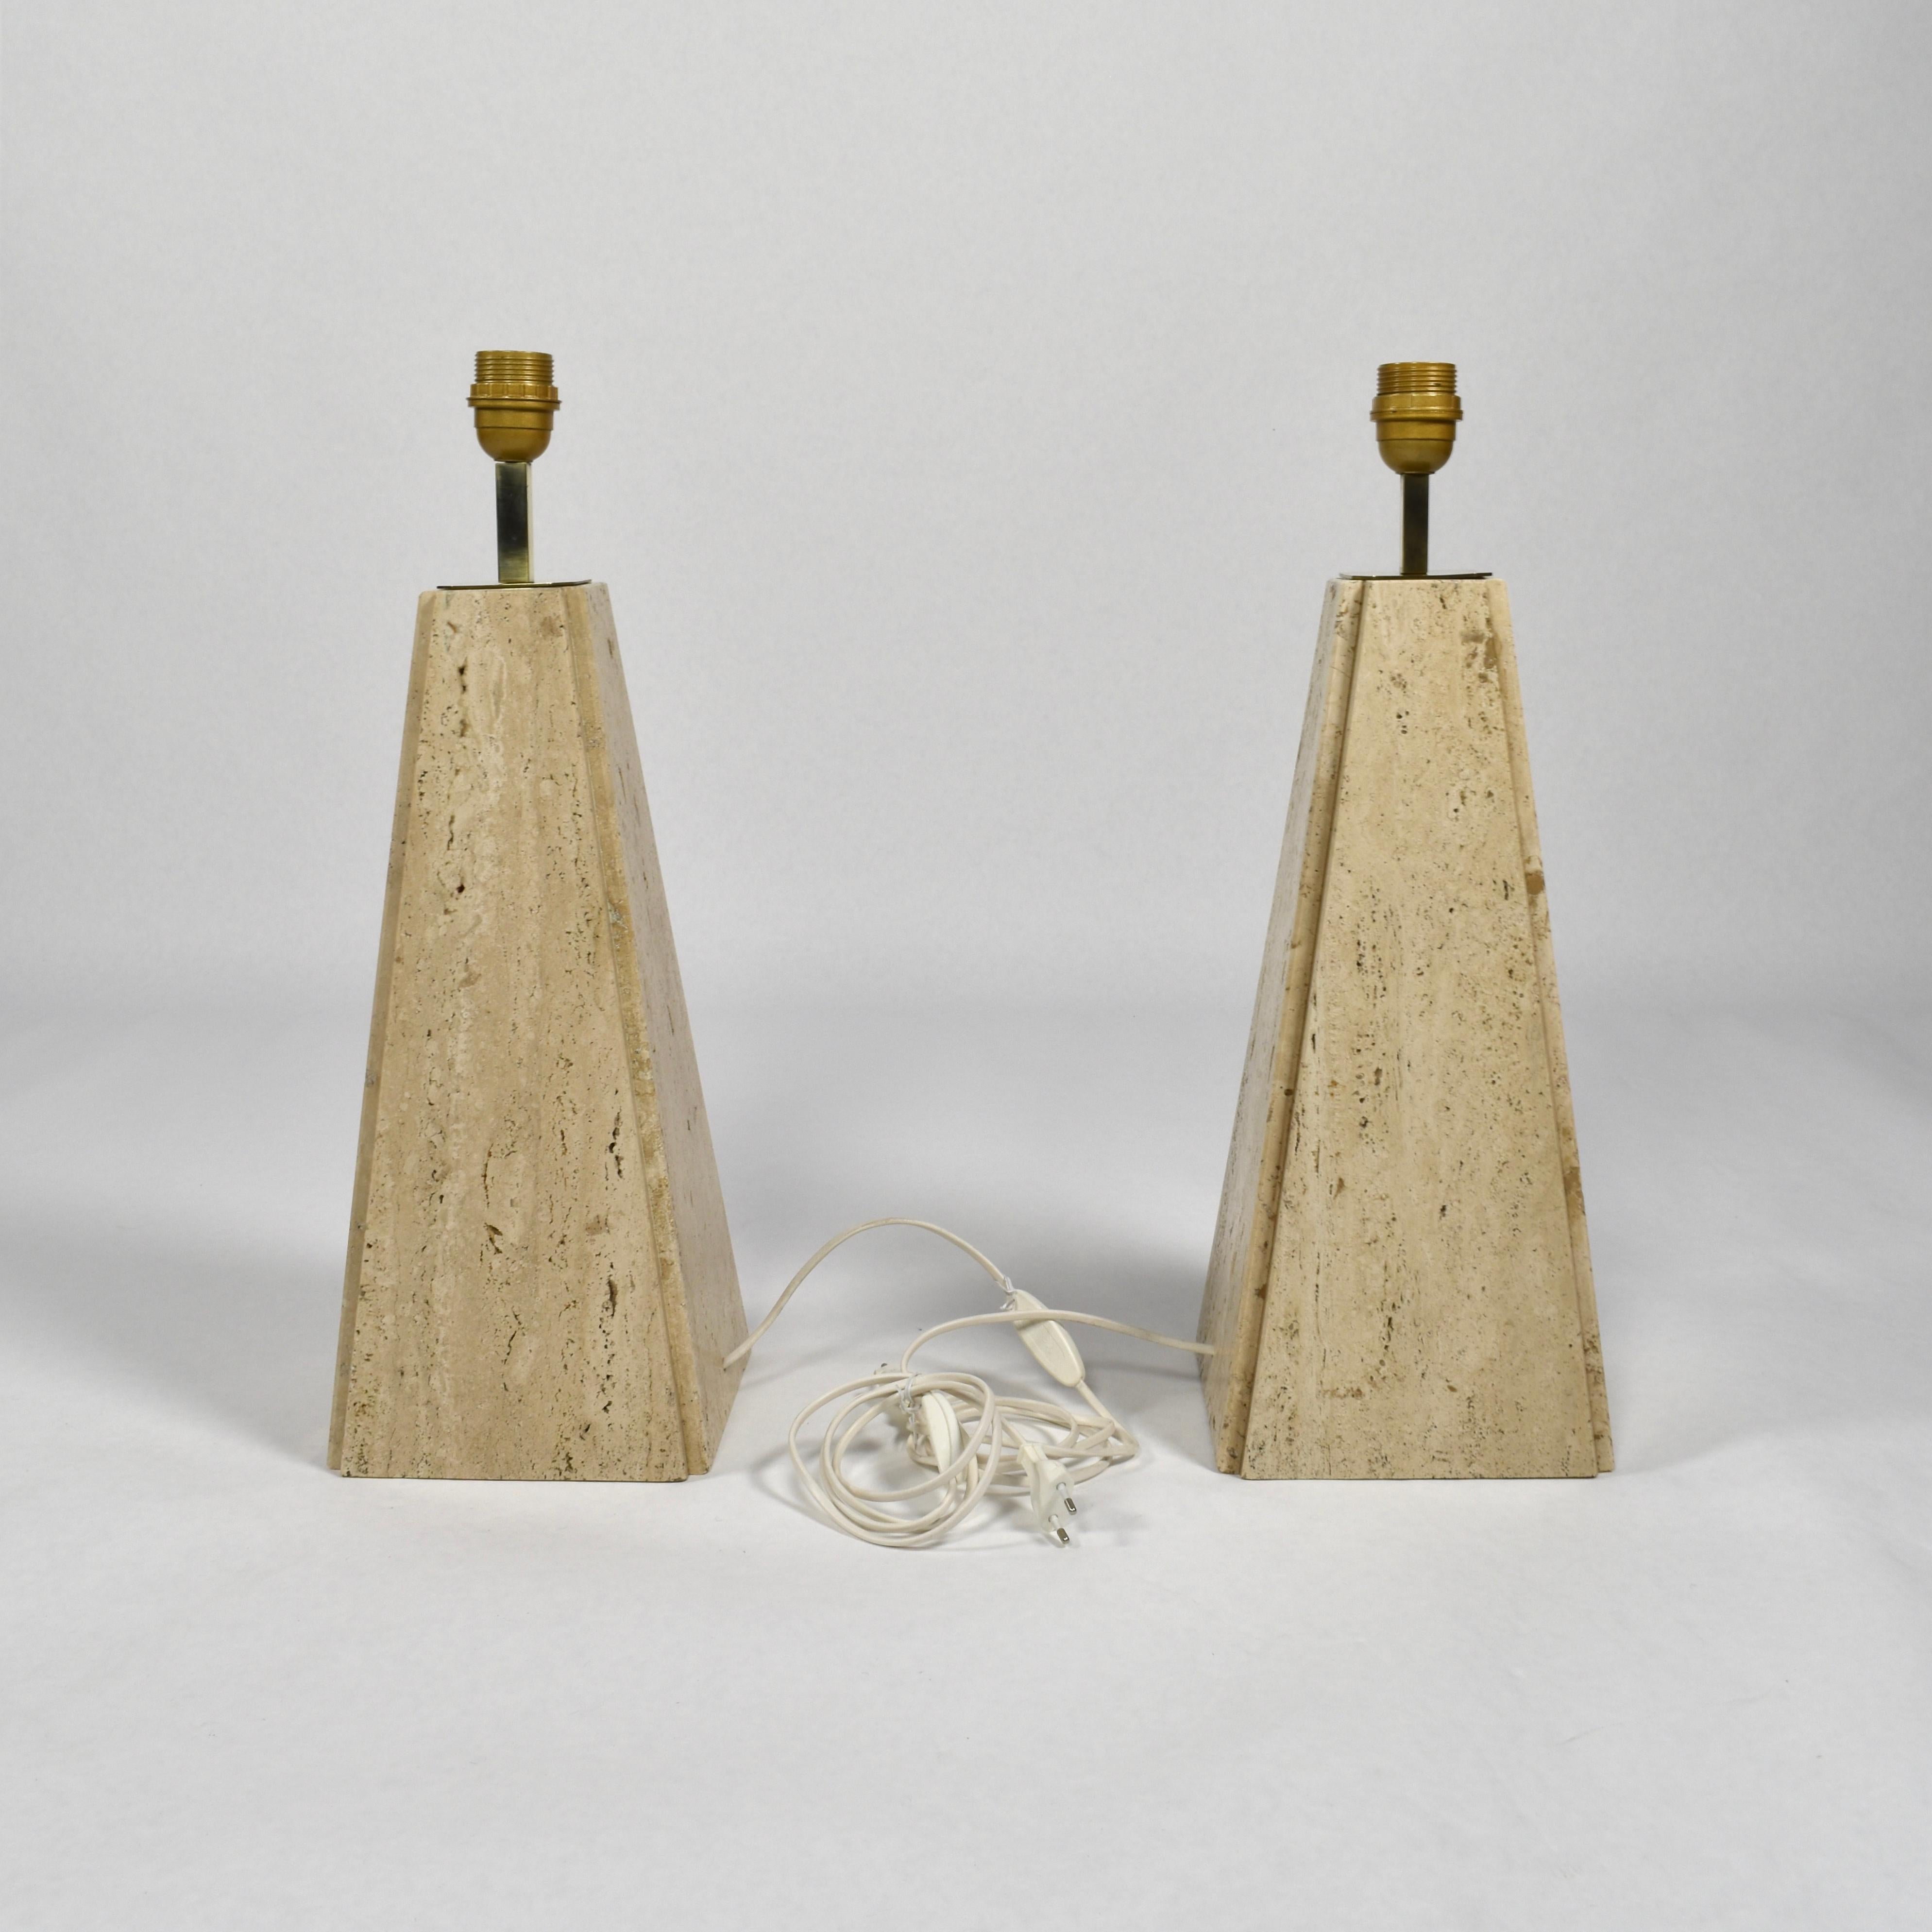 Pair of Camille Breesch Travertine and Brass Table Lamps, Belgium, circa 1970 3